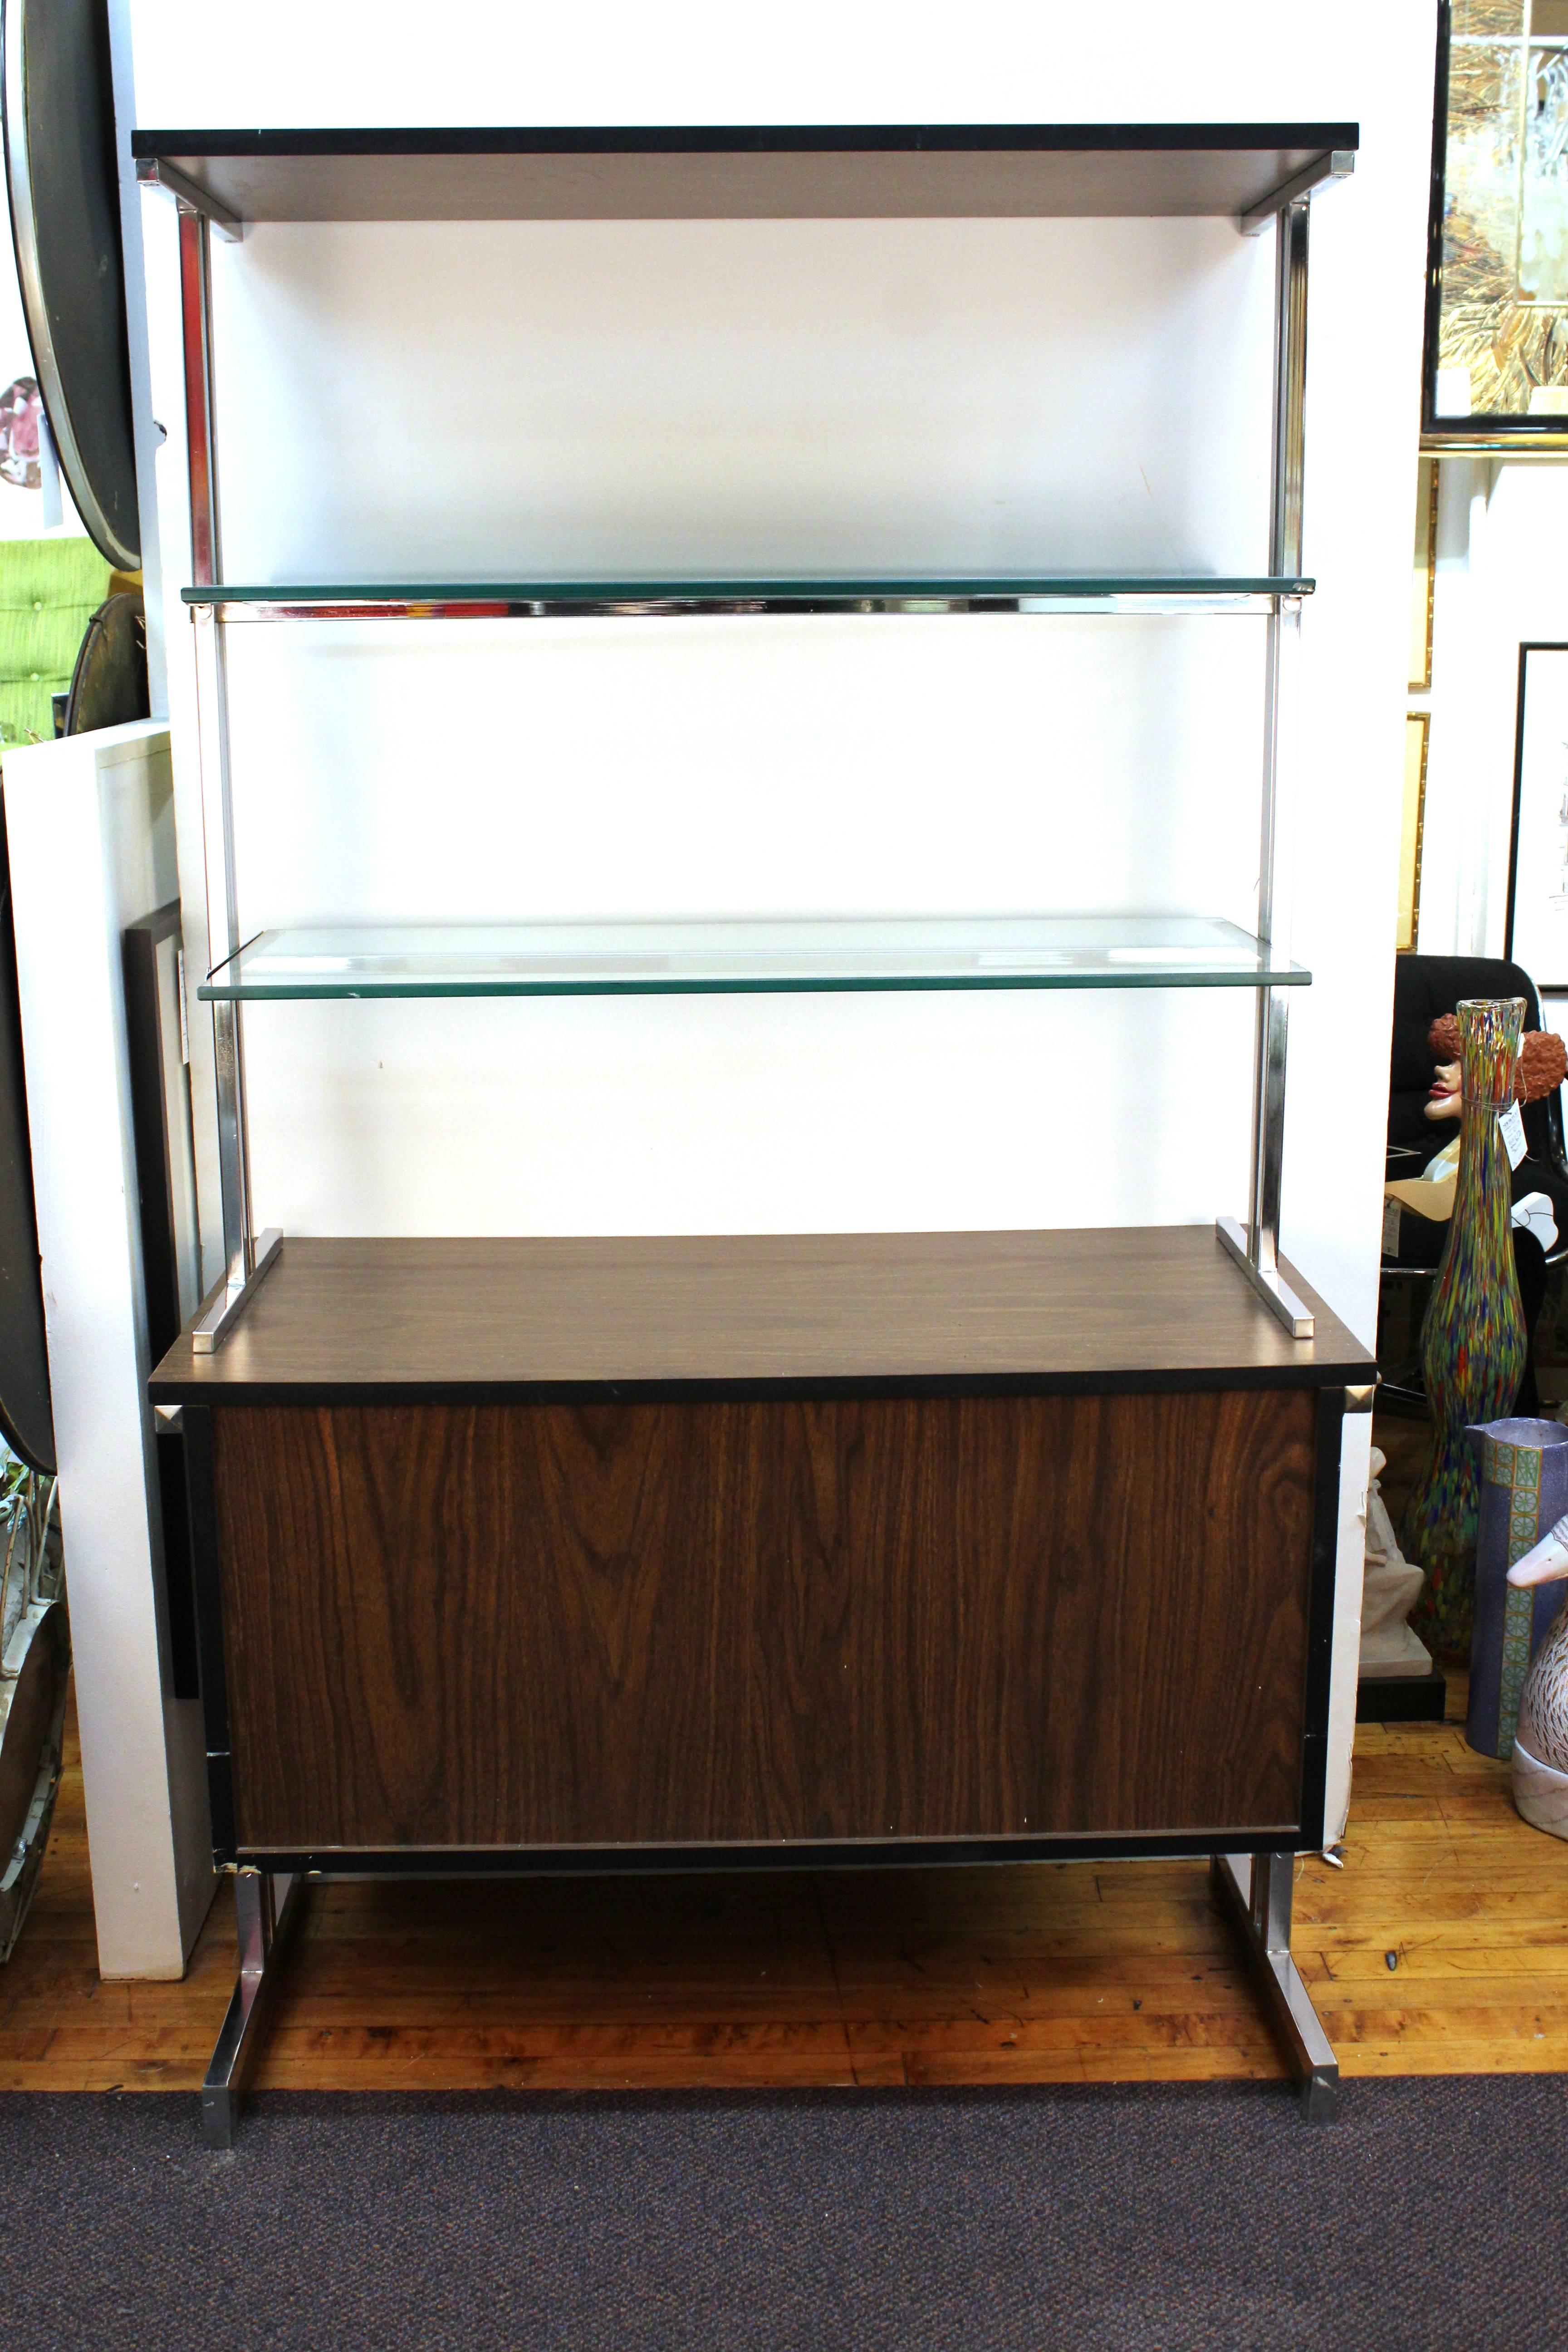 Pair of matching etageres or cabinets produced during the 1960s after Milo Baughman. Manufactured with a dark stained wood base mounted on chrome legs. Both include a detachable section with glass shelves on chrome. Despite some minor scratches to